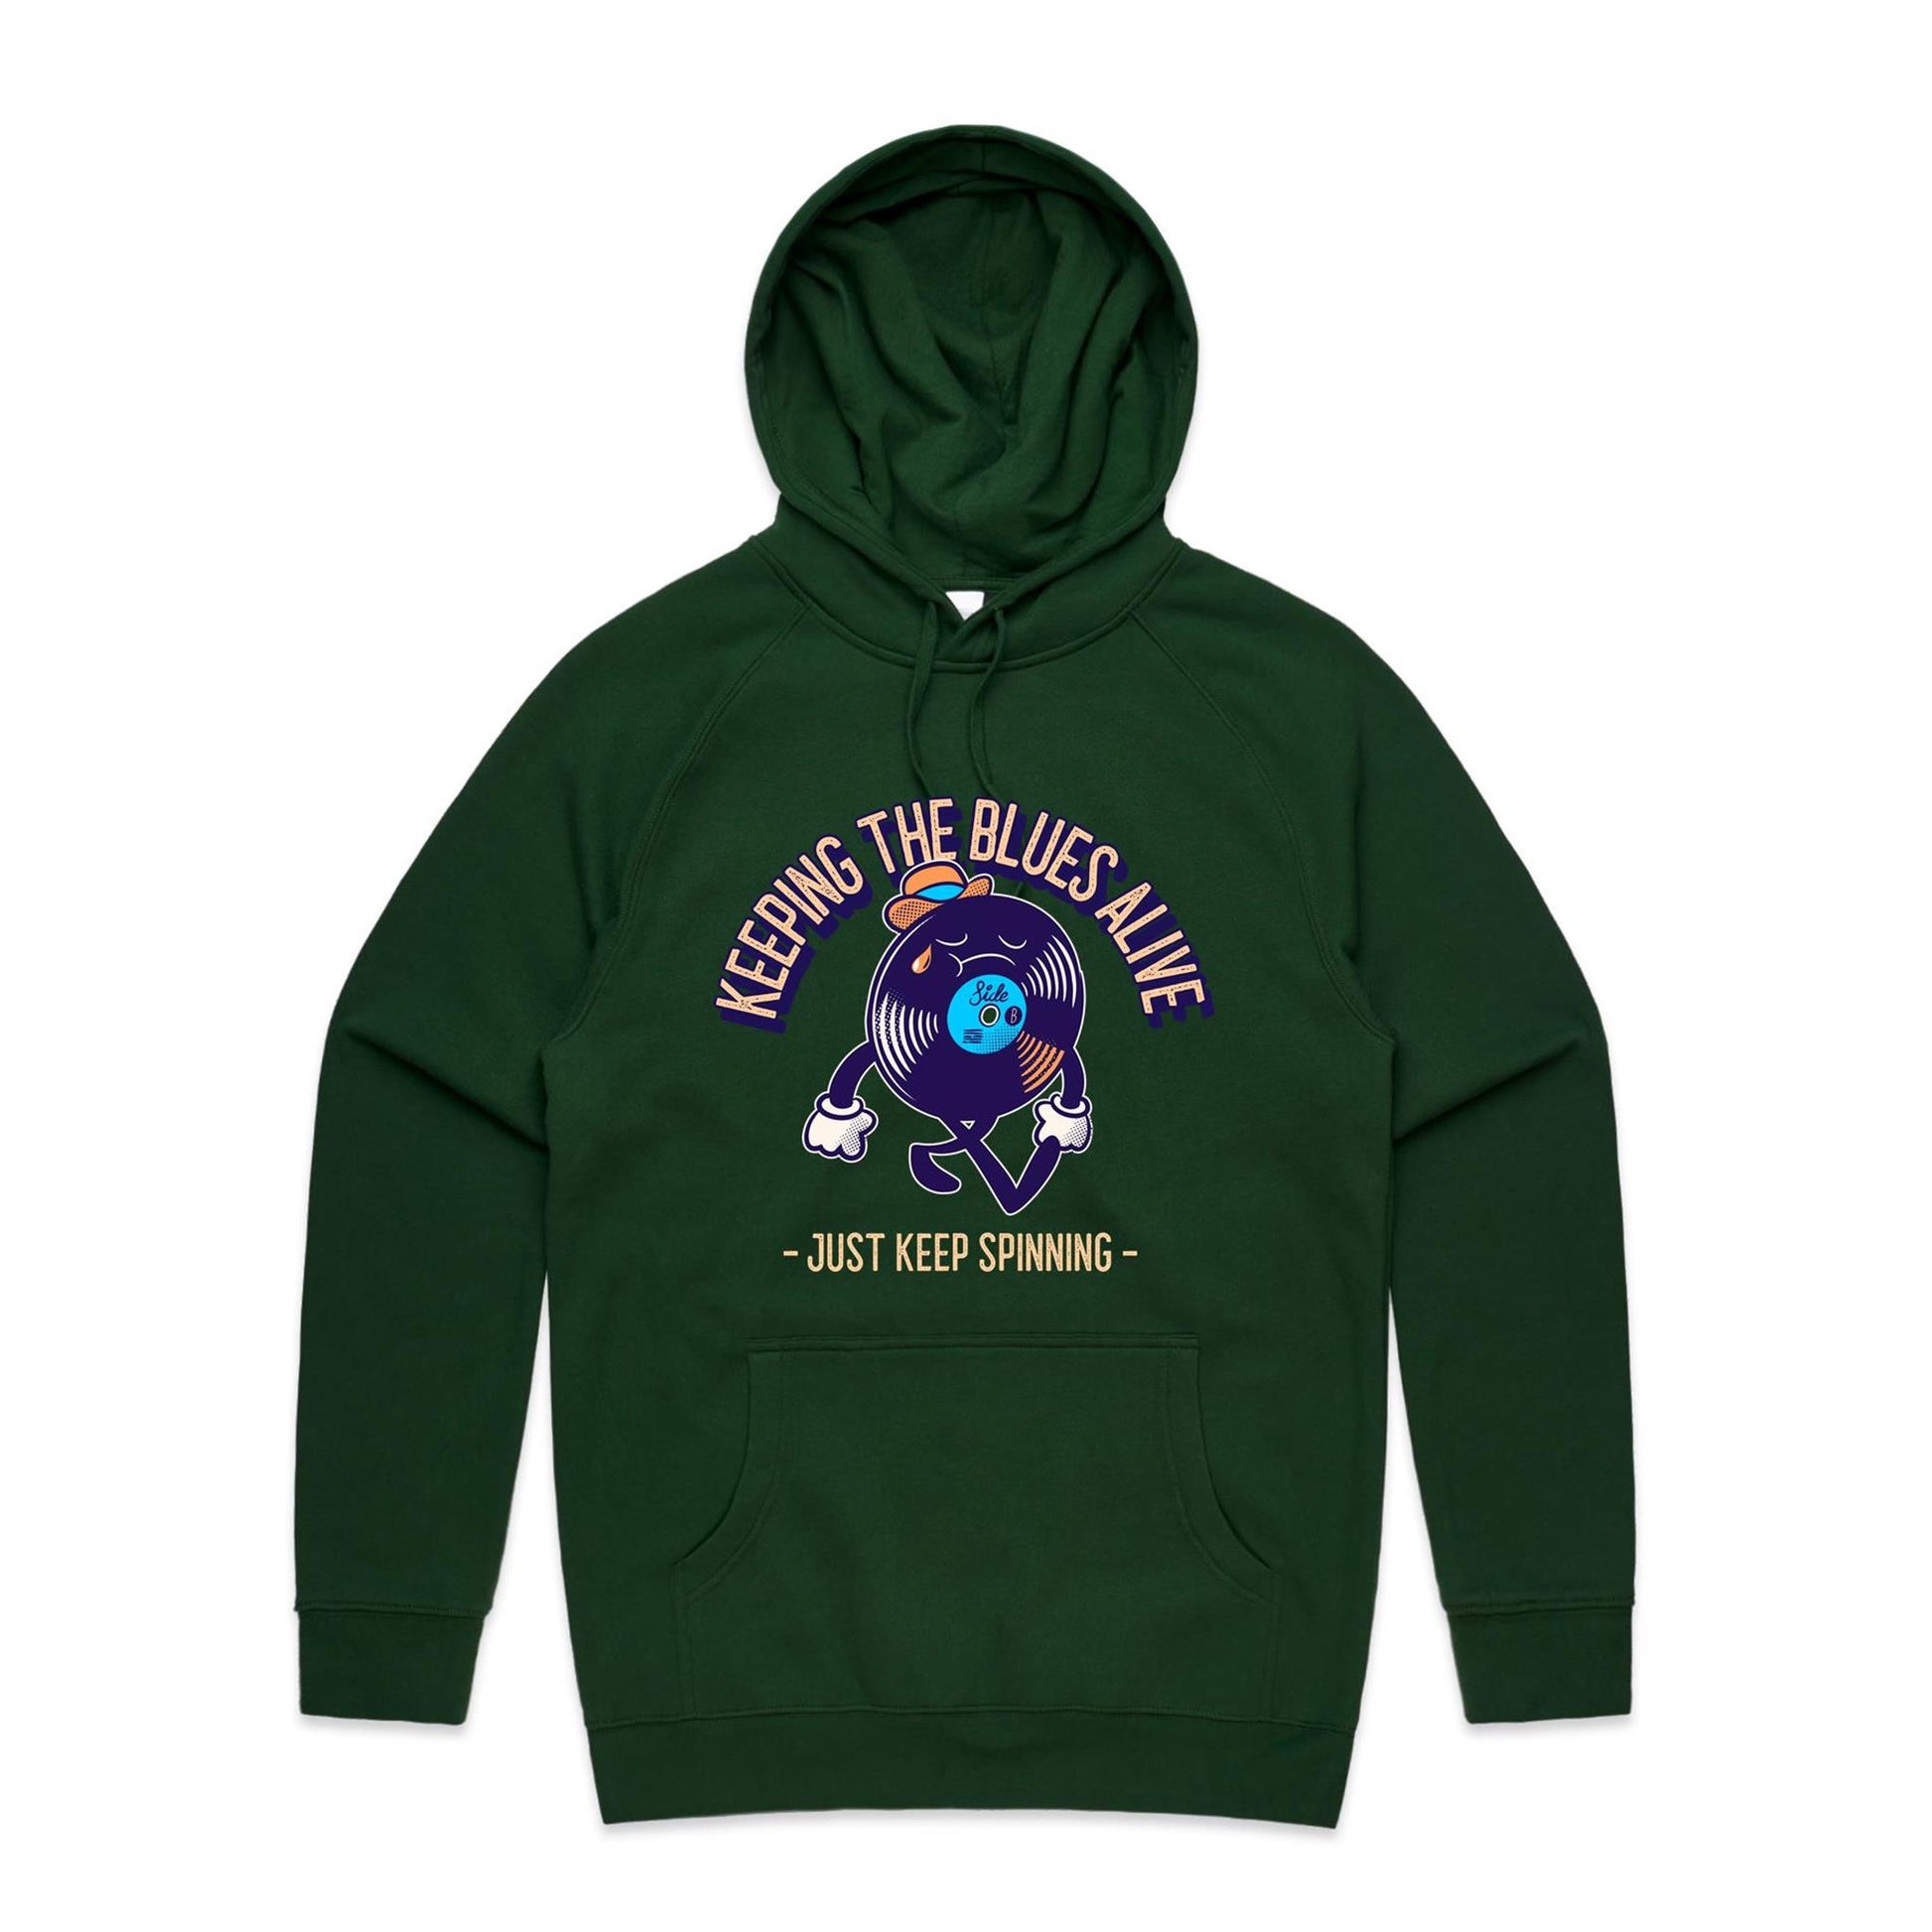 Keeping The Blues Alive - Supply Hood Forest Green Mens Supply Hoodie Music